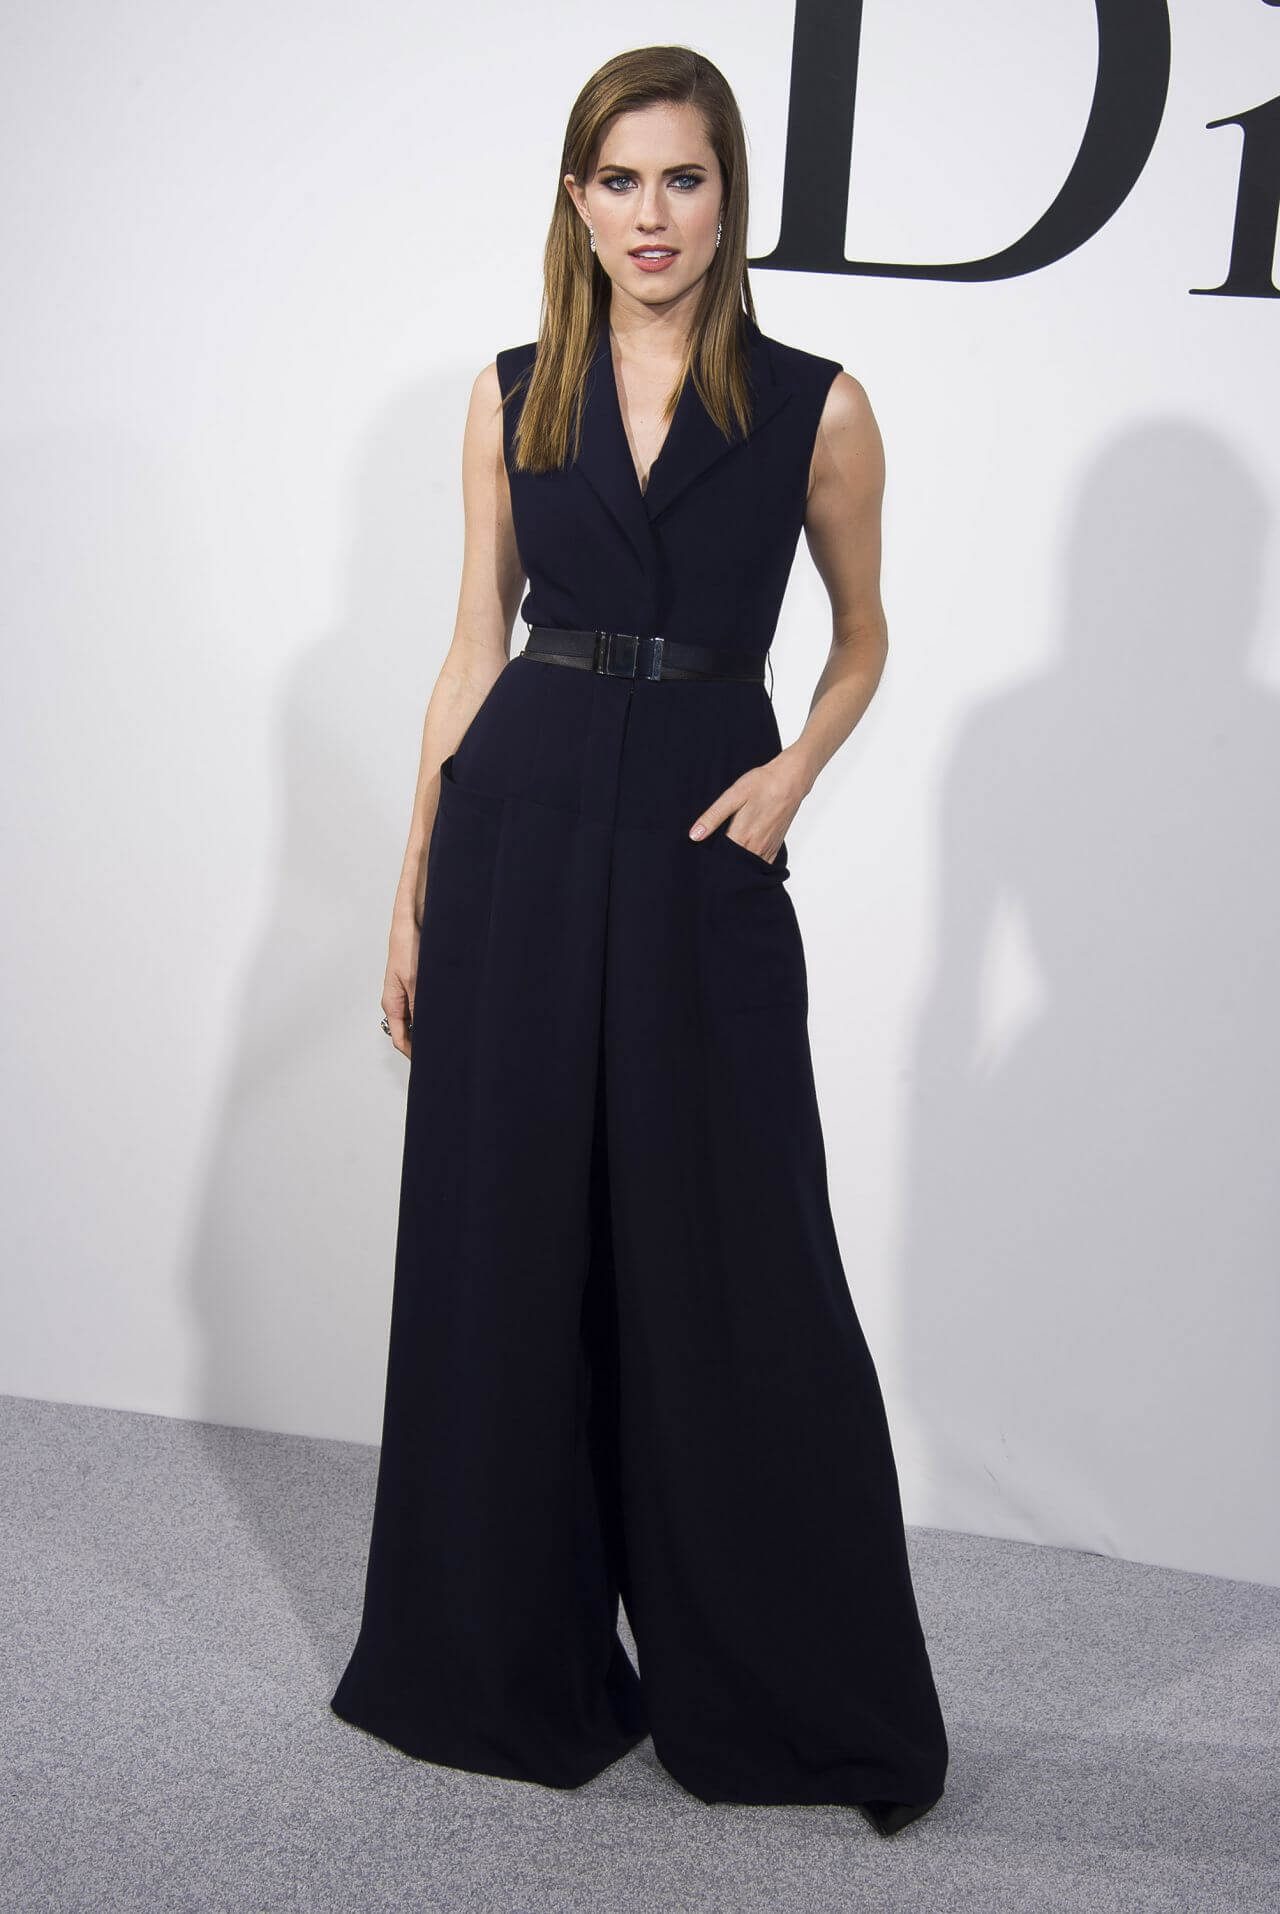 Allison Williams - In Navy Blue Sleeveless Flared Jumpsuit With Black Belt